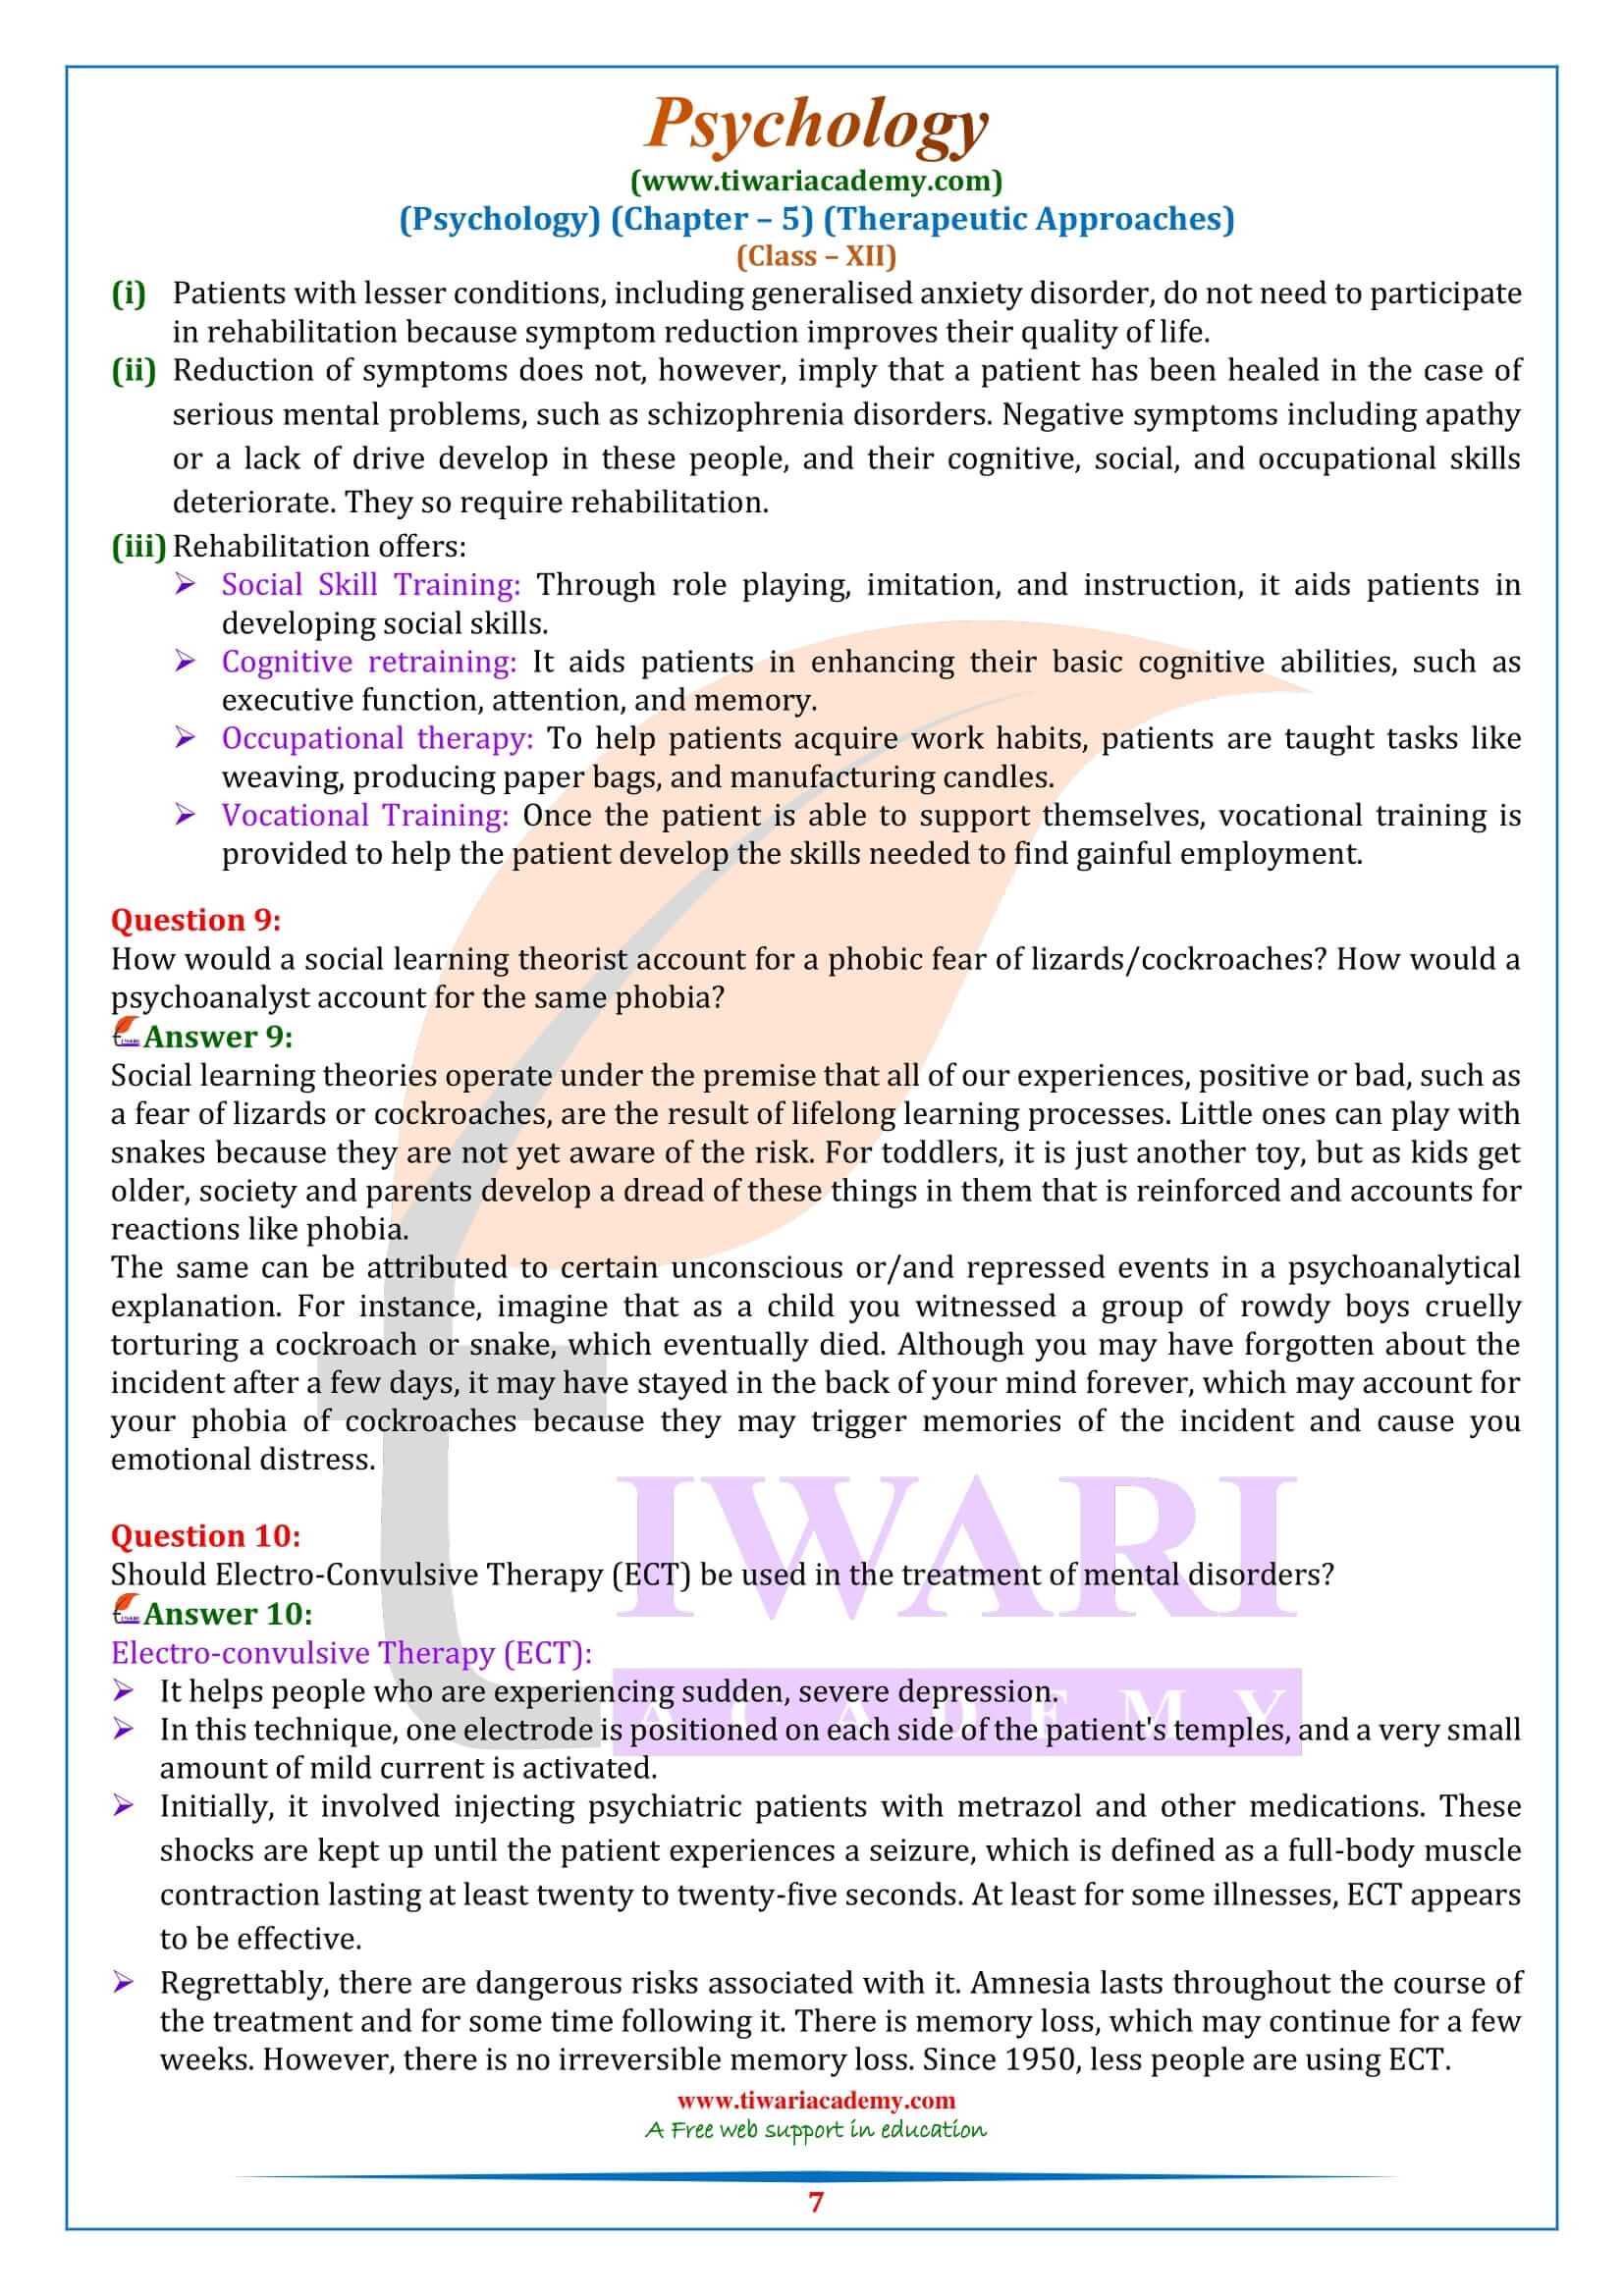 NCERT Solutions for Class 12 Psychology Chapter 5 guide